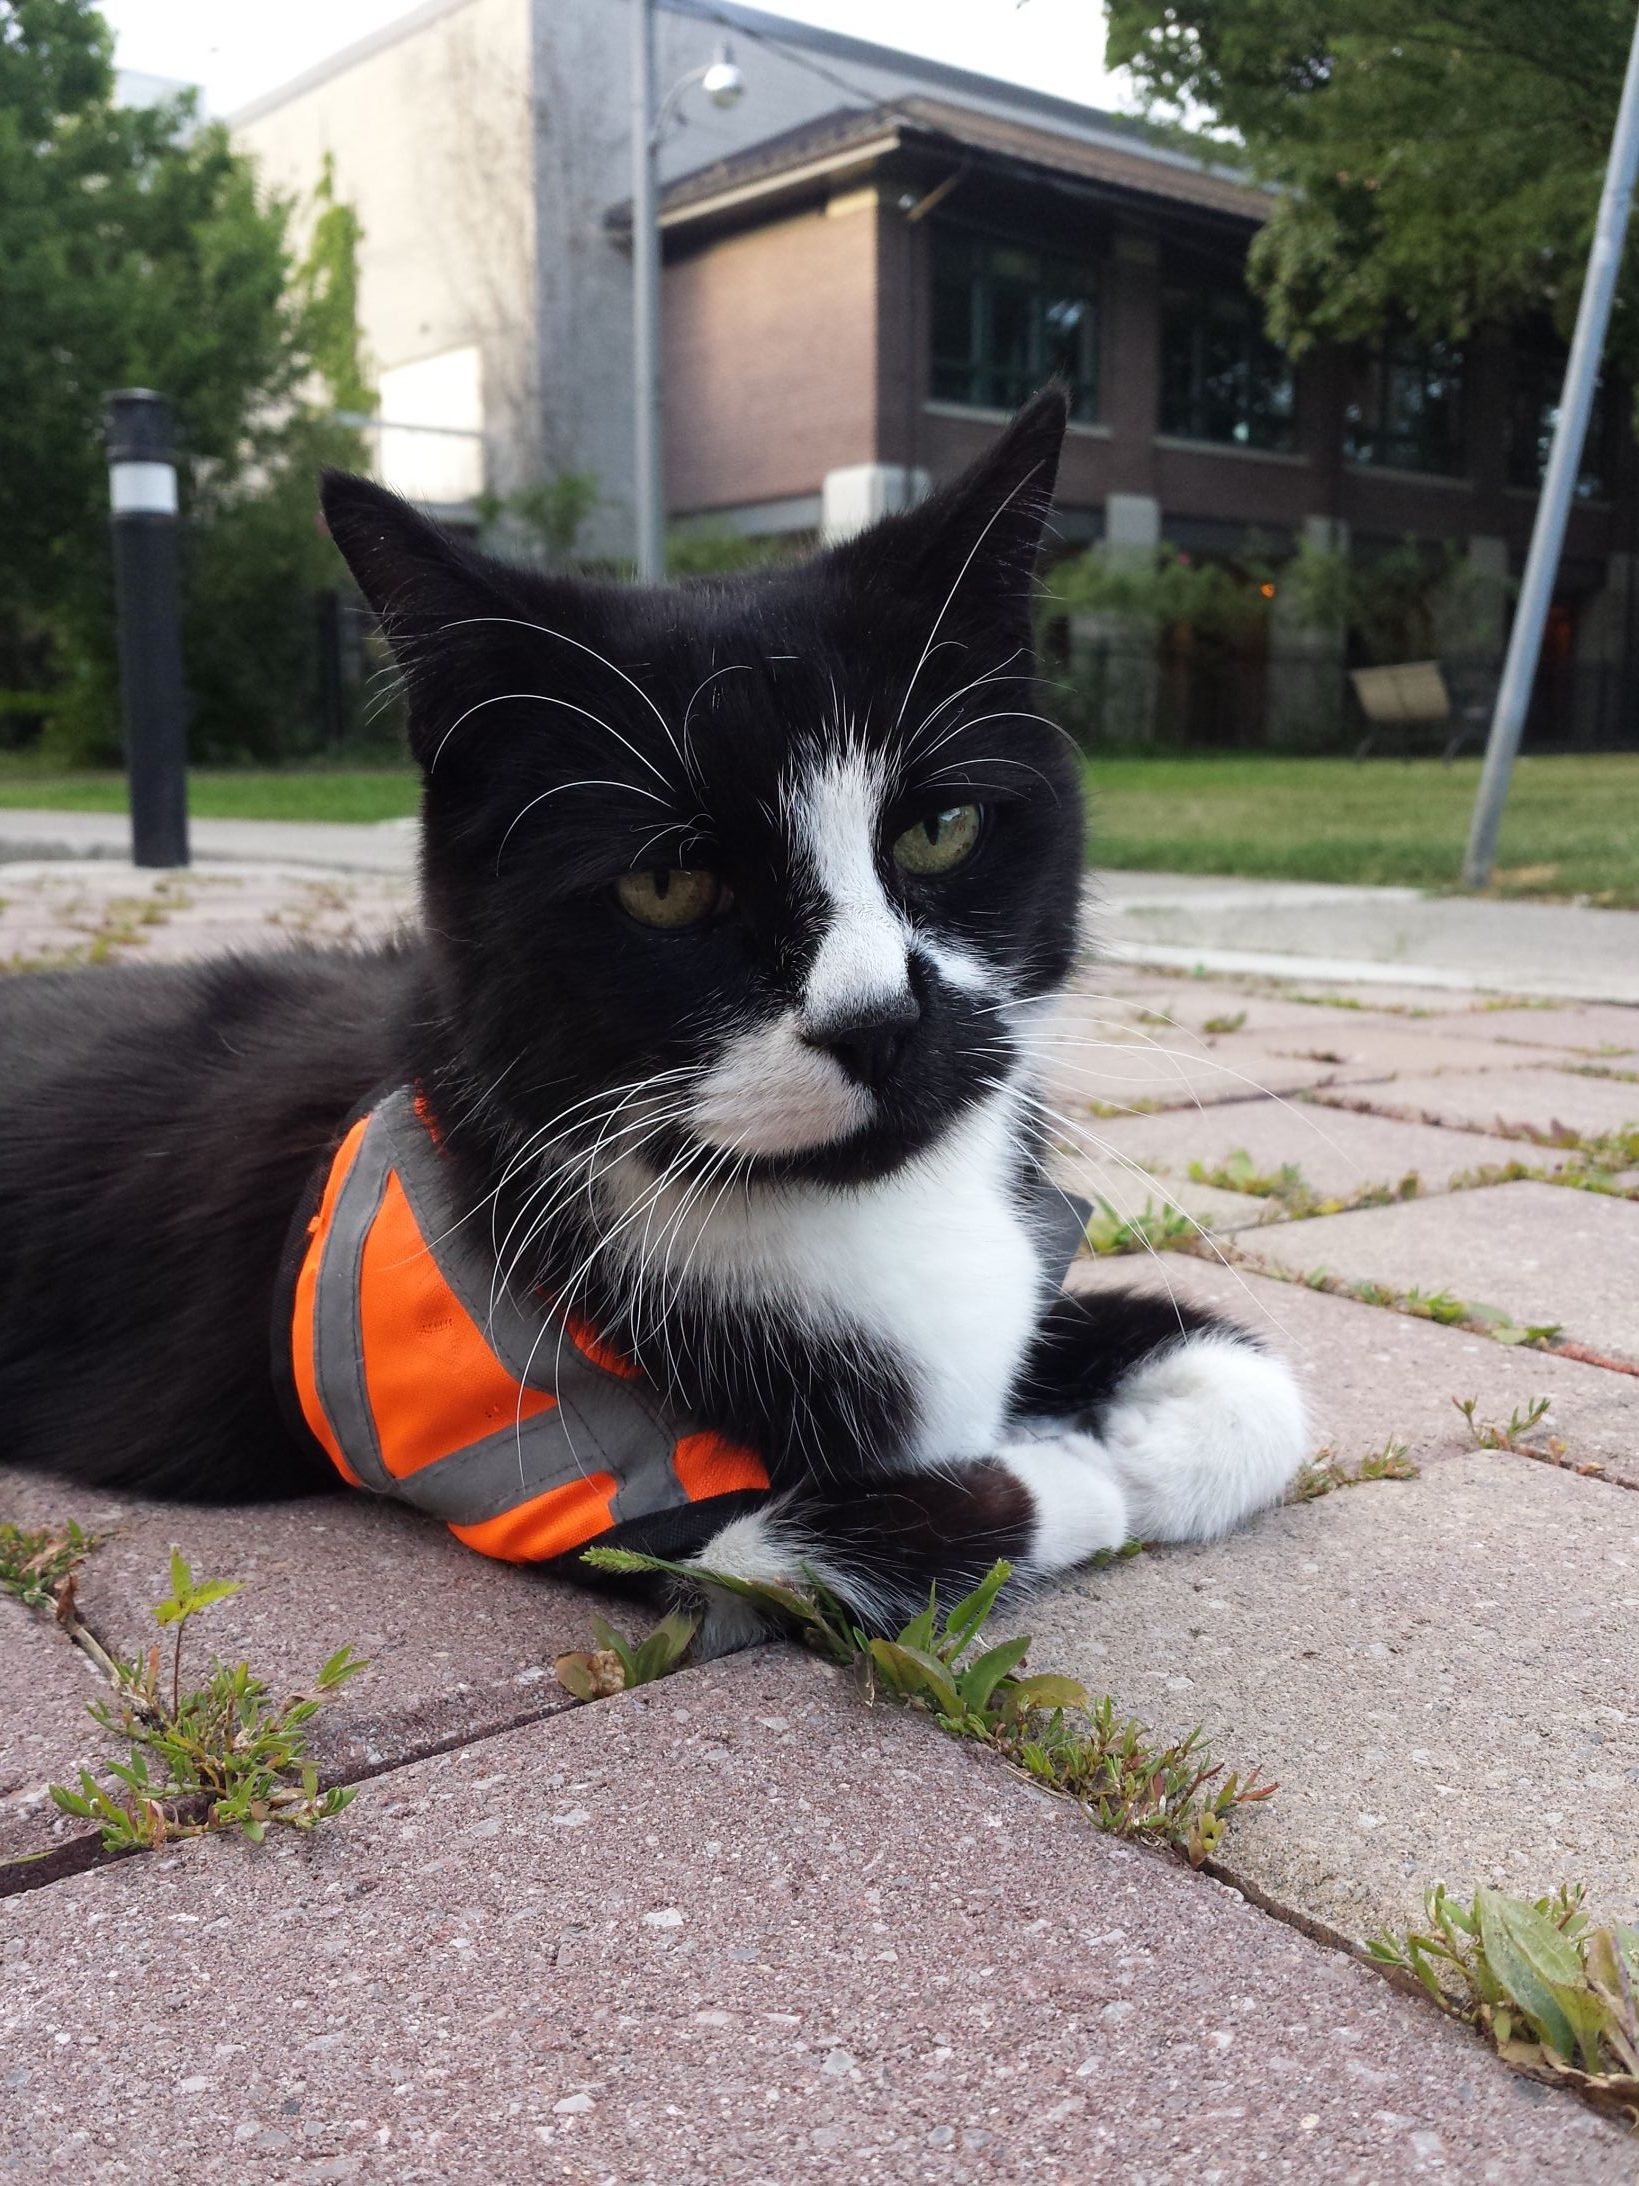 Safety Cat Meme Contest - Environmental Health and Safety